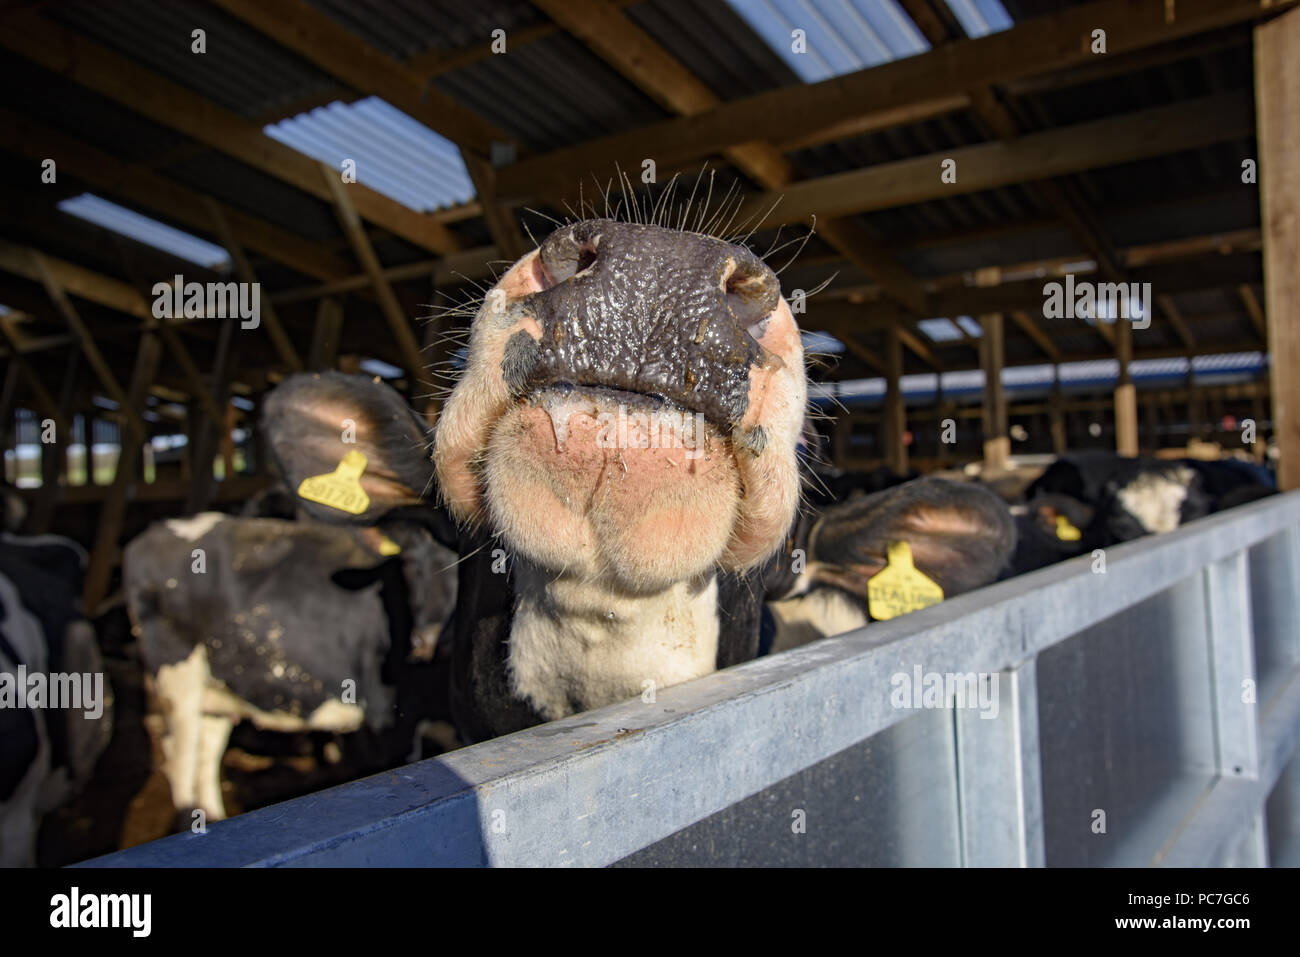 Close-up of the nose of a dairy cow in a farm building, Bury, Greater Manchester, England. Stock Photo